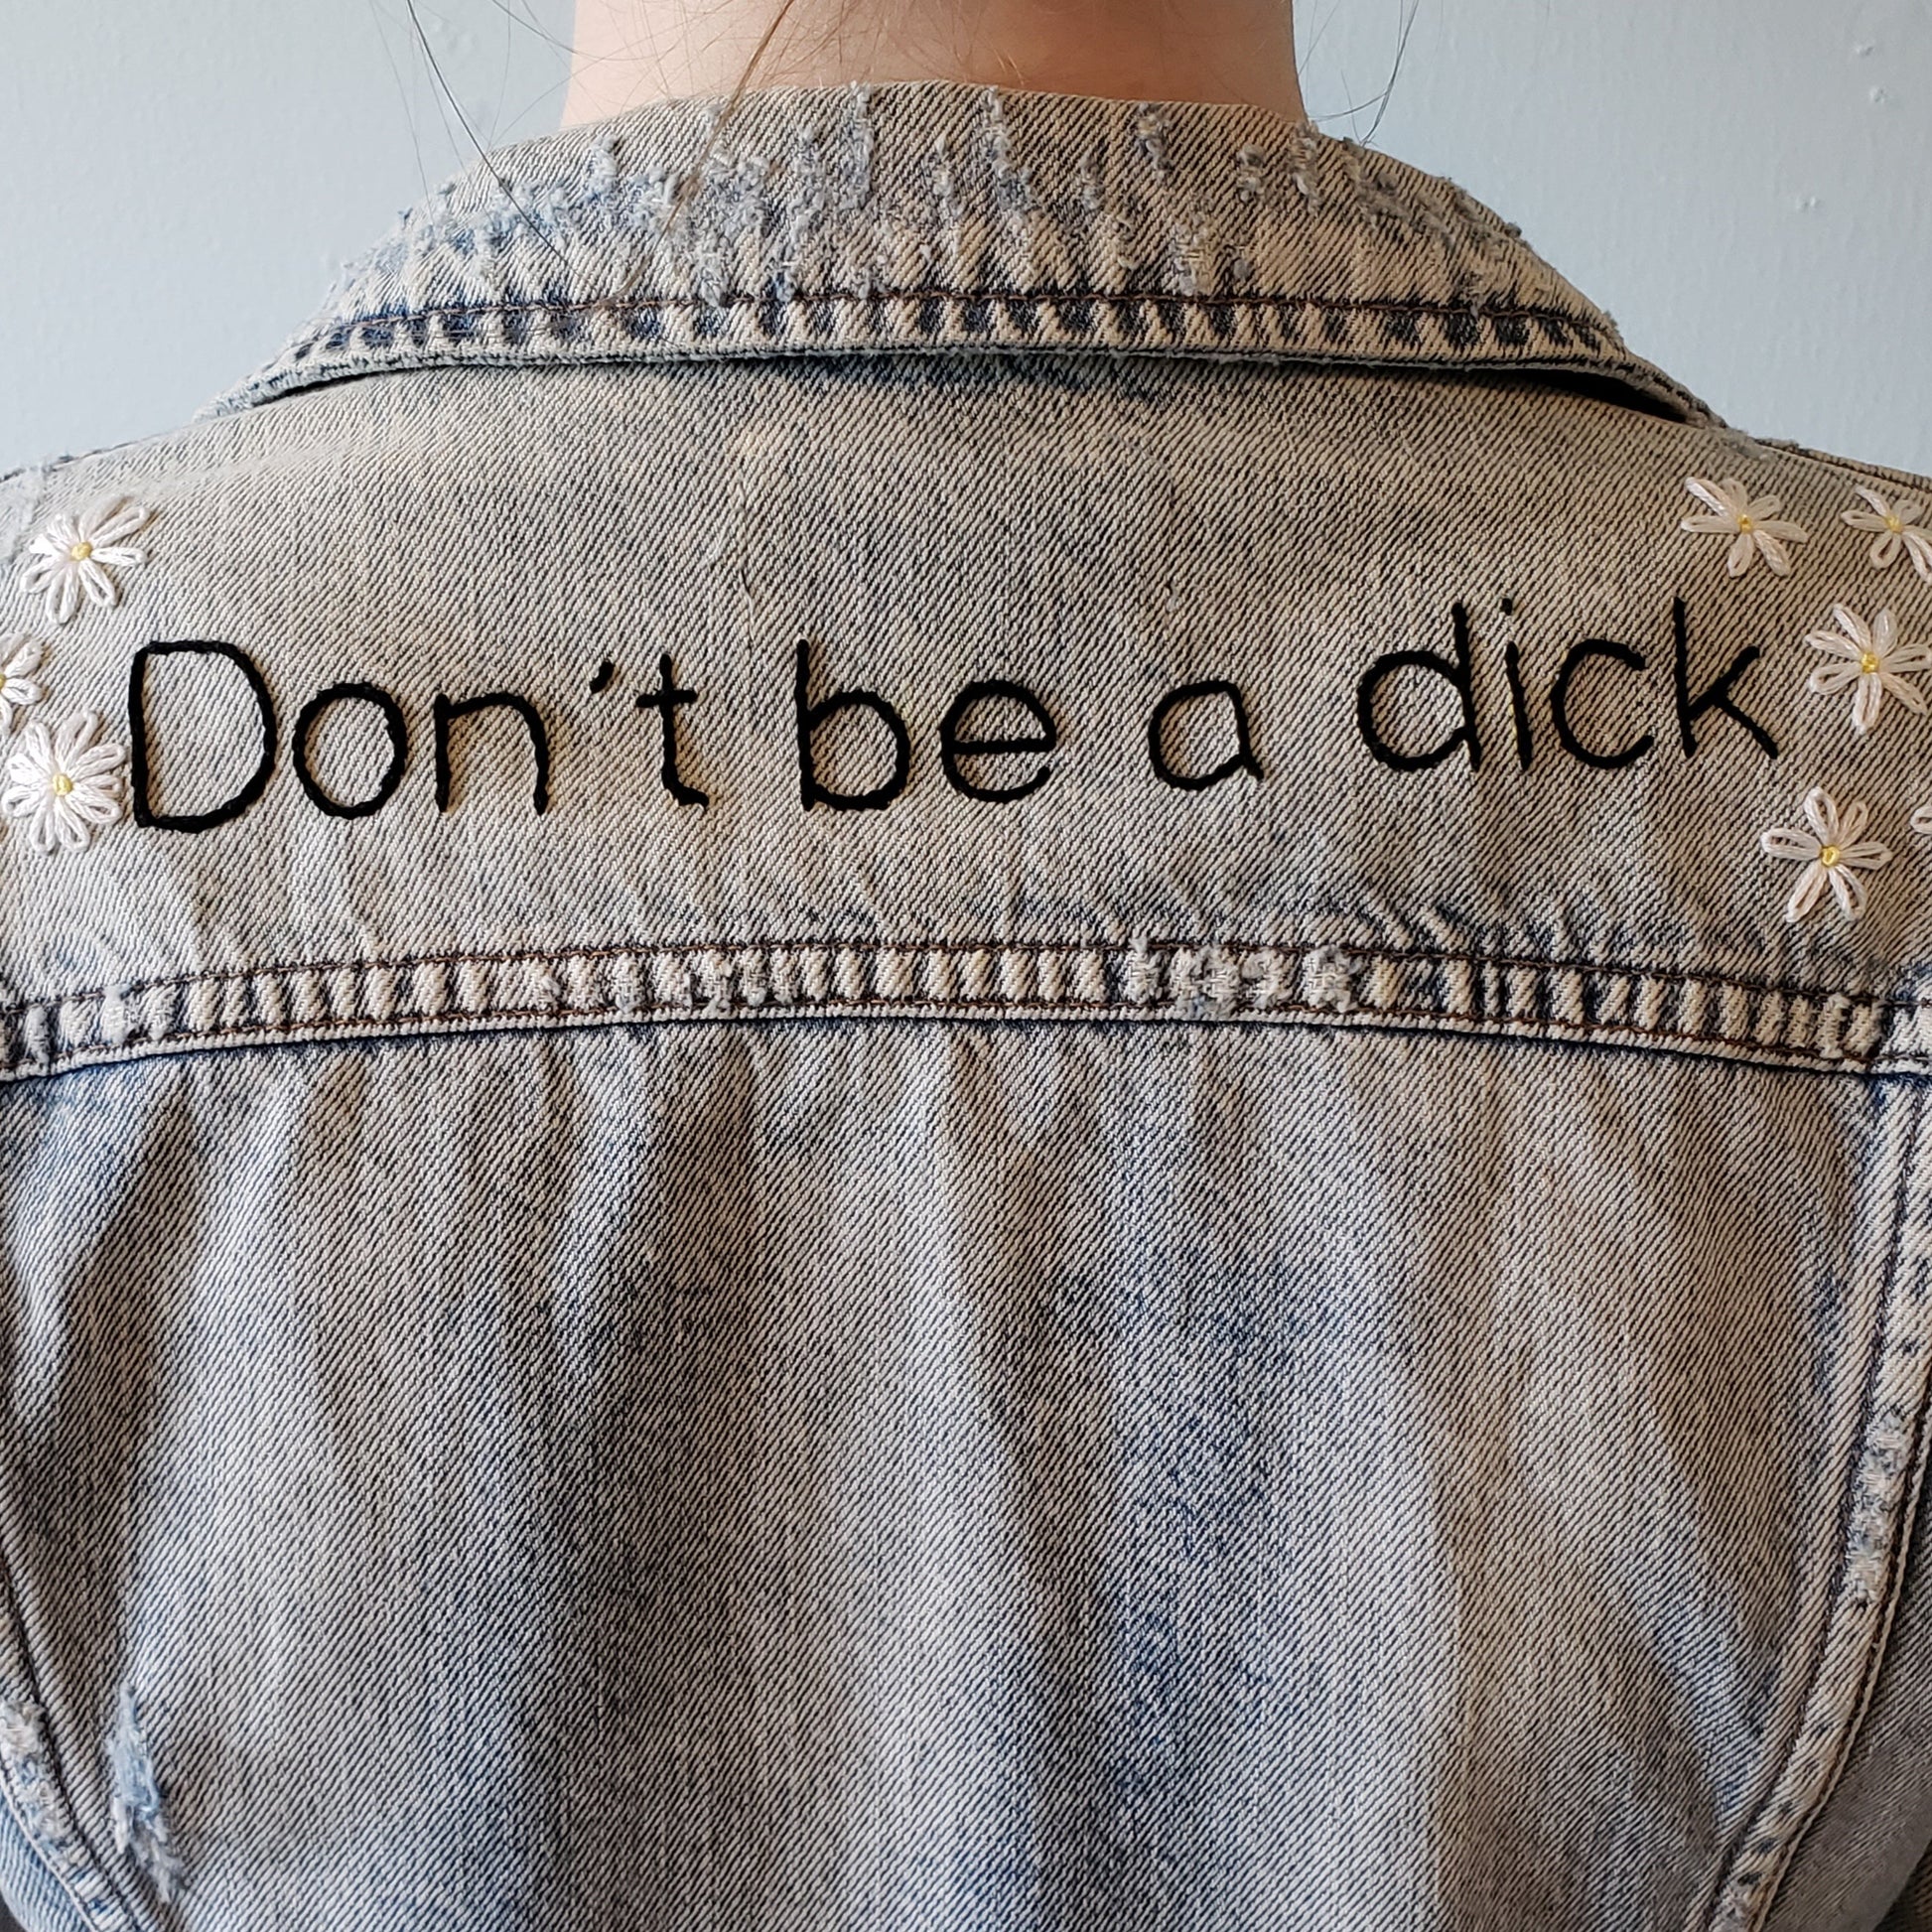 The back of the jacket, this time closer up. "Don't be a dick" is hand sewn straight across the back panel, and 6 daisies bookend the text on each side. The text is stitched in black, and looks quite bold in a font similar to Helvetica.